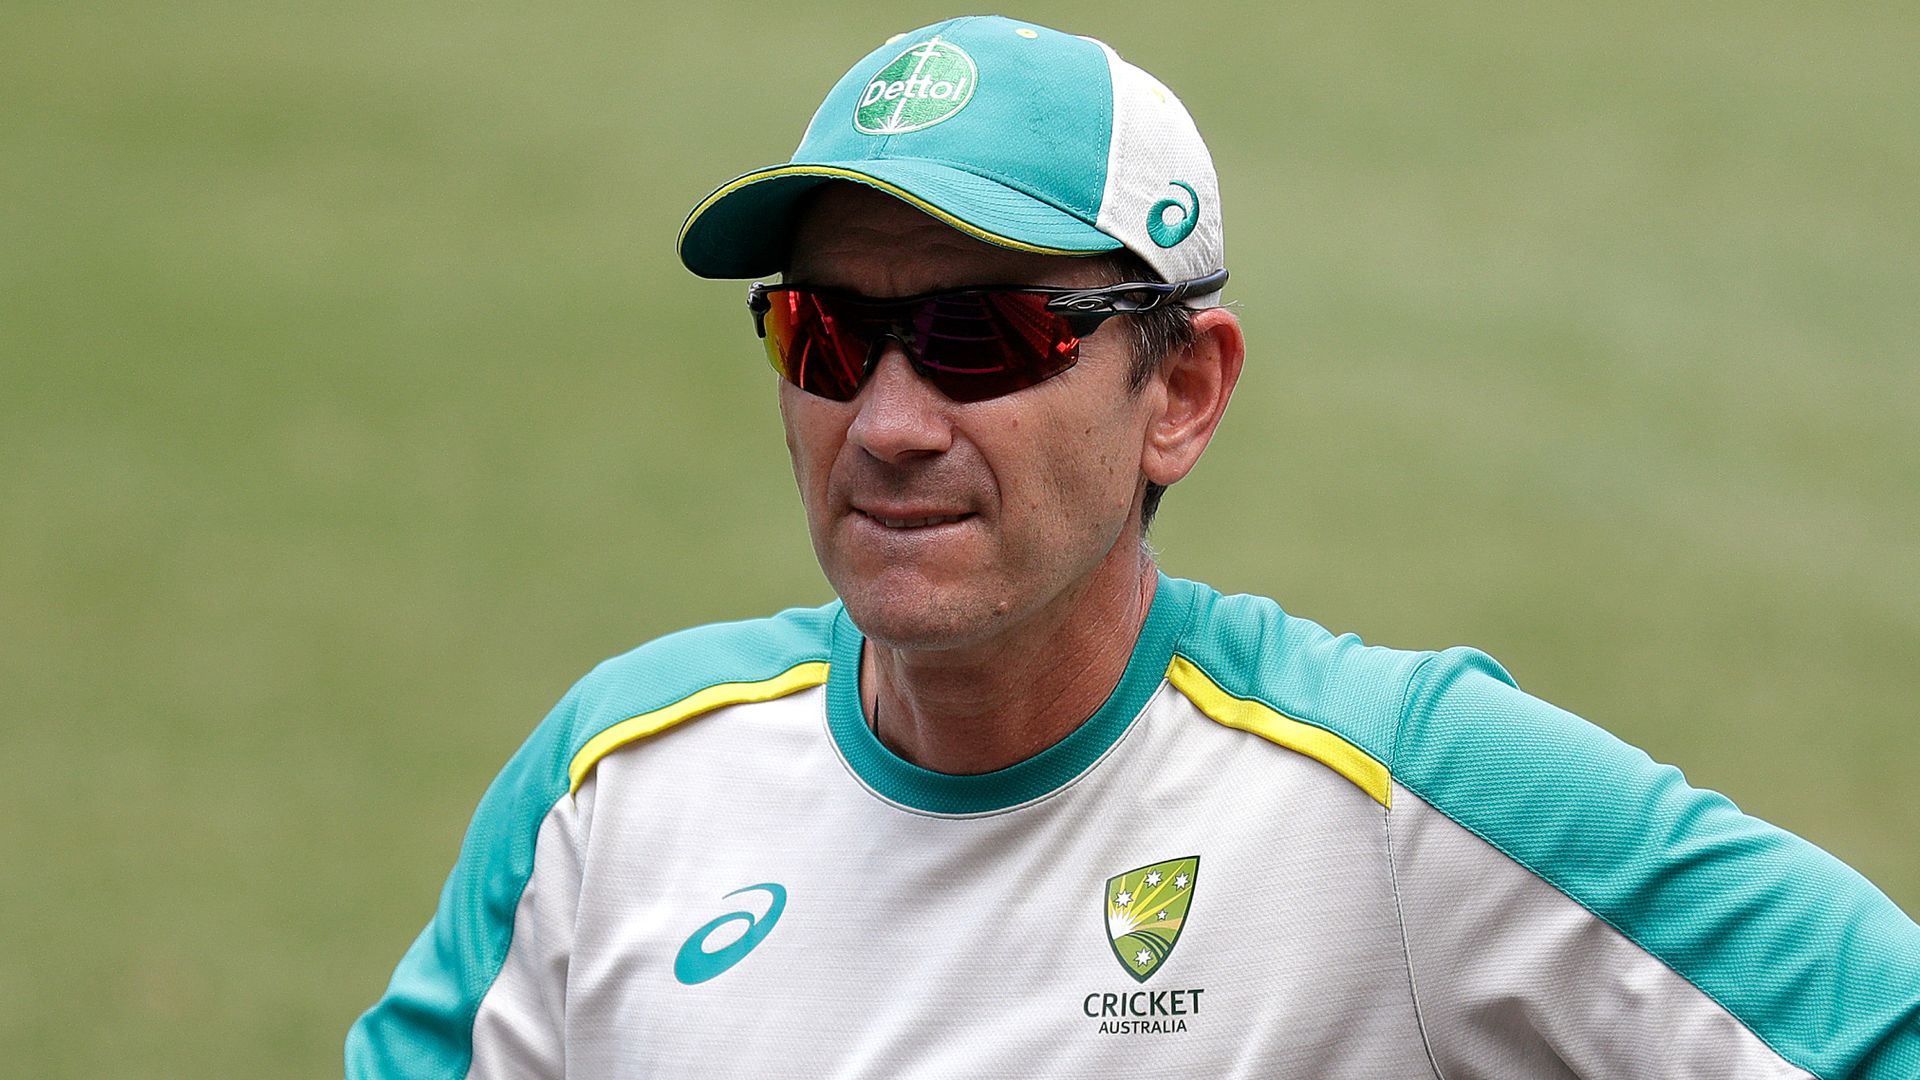 'Langer feels like Aus players are stabbing him in the back'